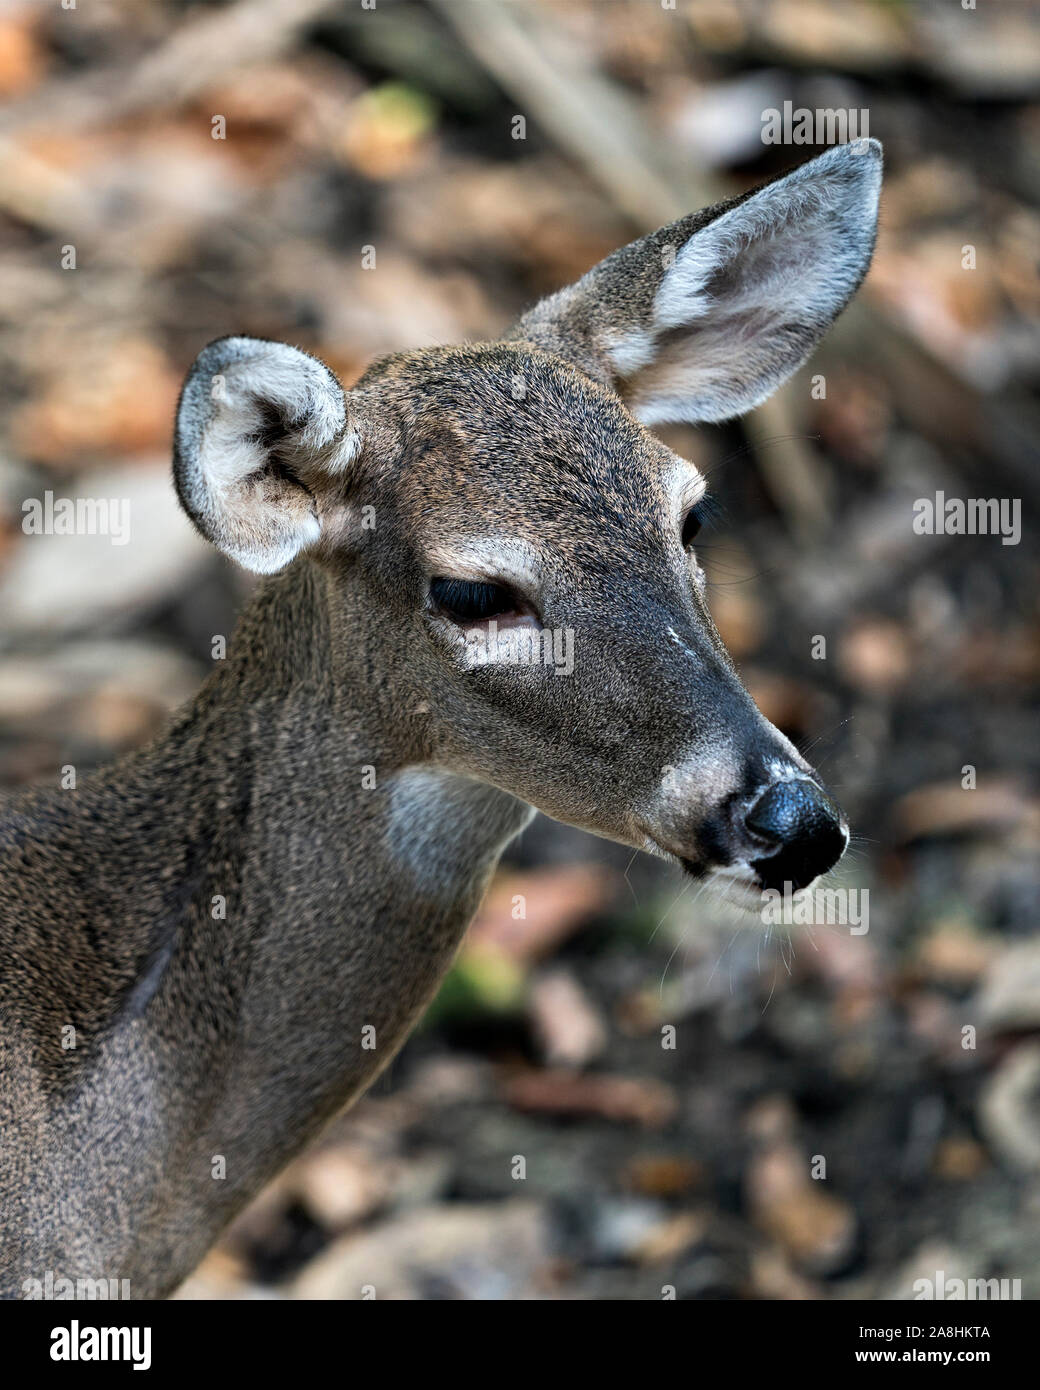 Deer (Florida Key Deer) close-up head view exposing its head, ears, eyes, nose, in its environment and surrounding with a bokeh background. Stock Photo